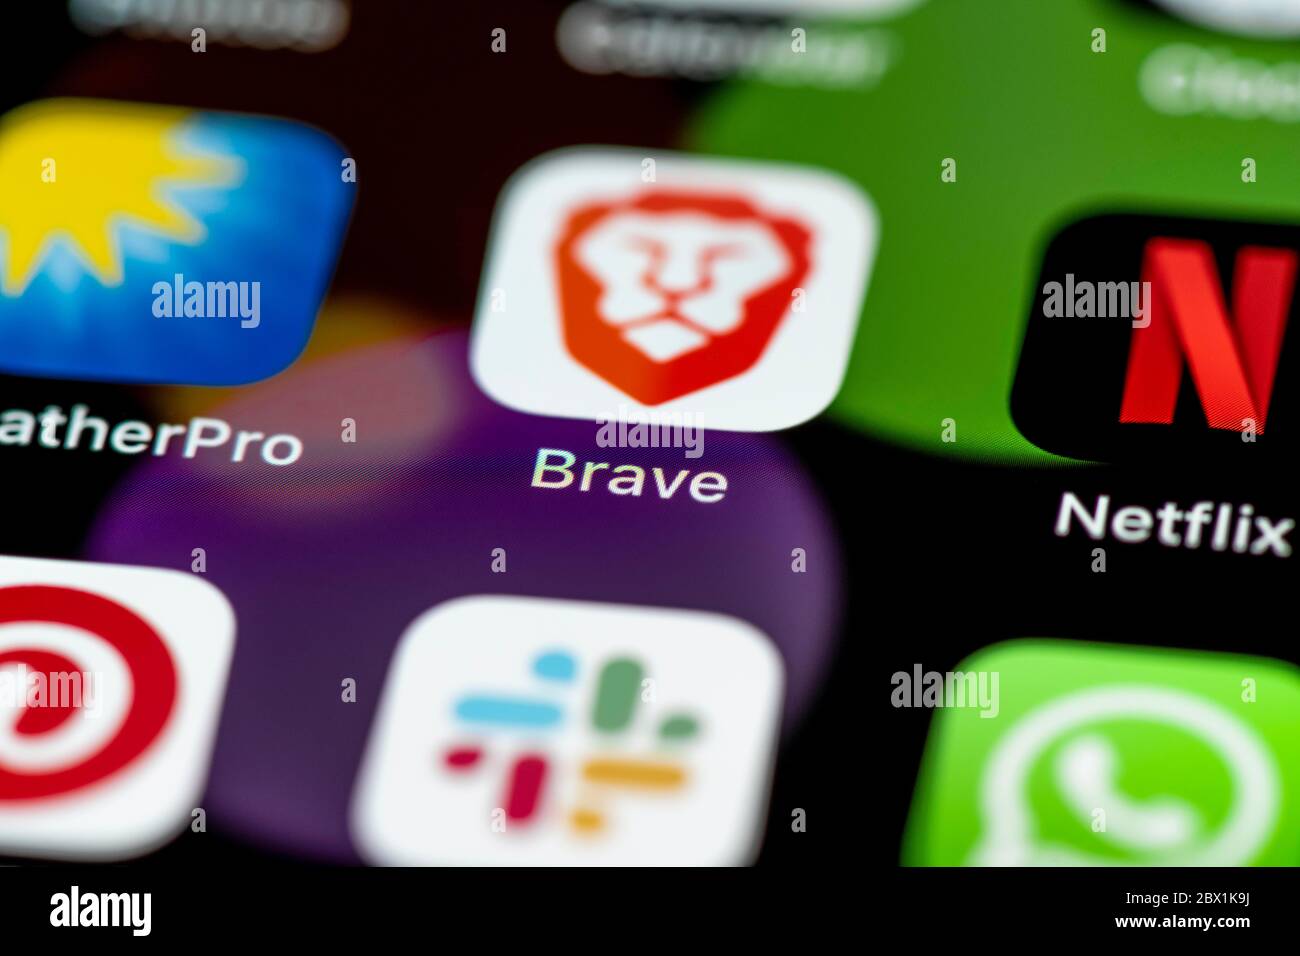 Brave Browser, App Icons on a mobile phone display, iPhone, Smartphone, close-up Stock Photo